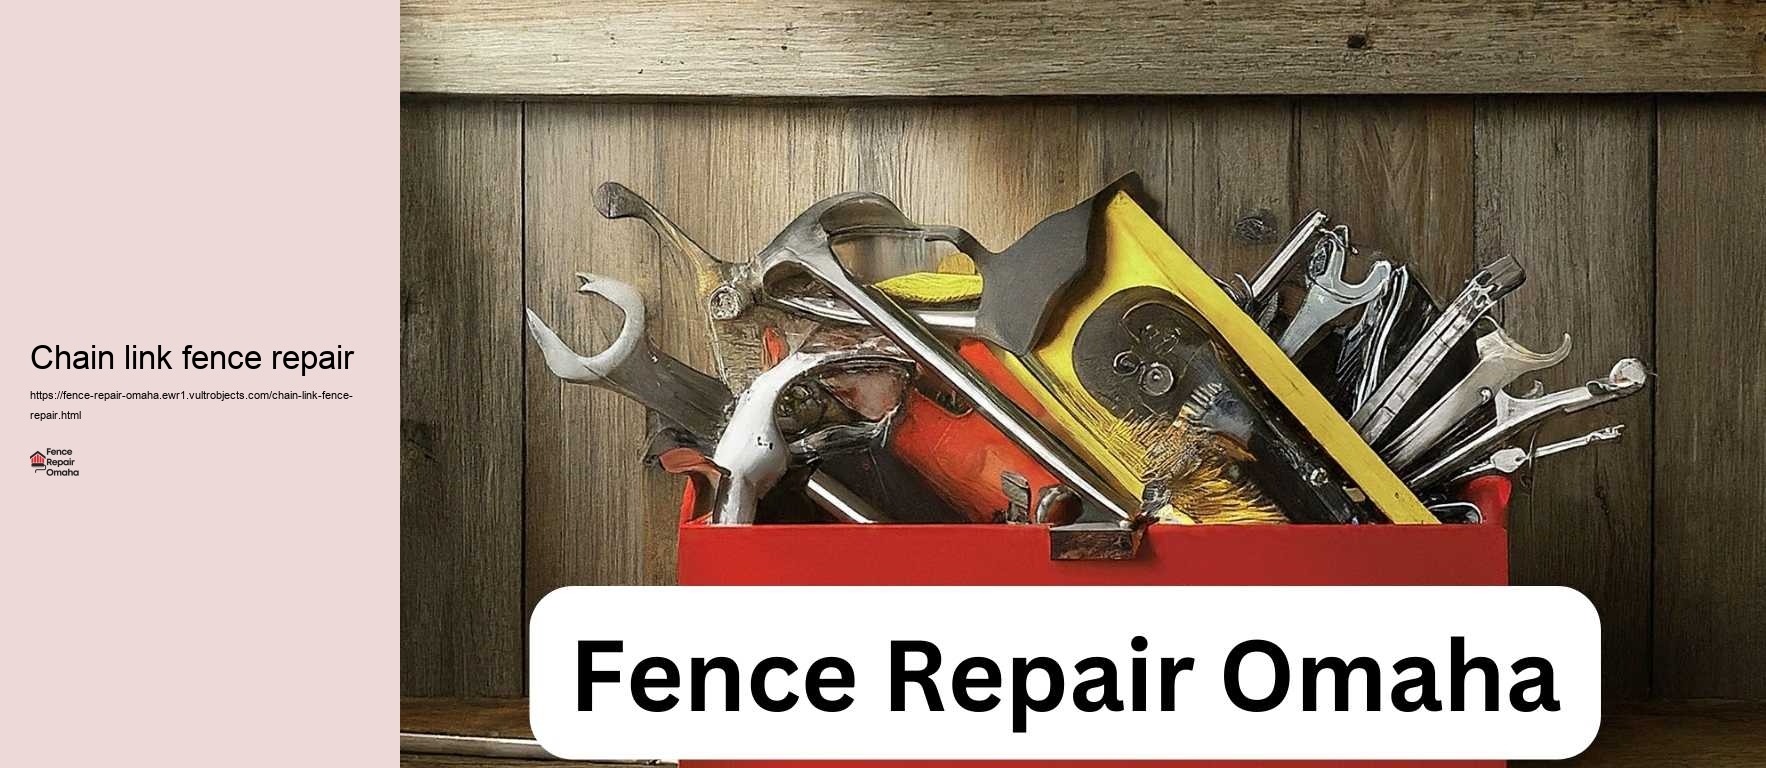 Chain link fence repair